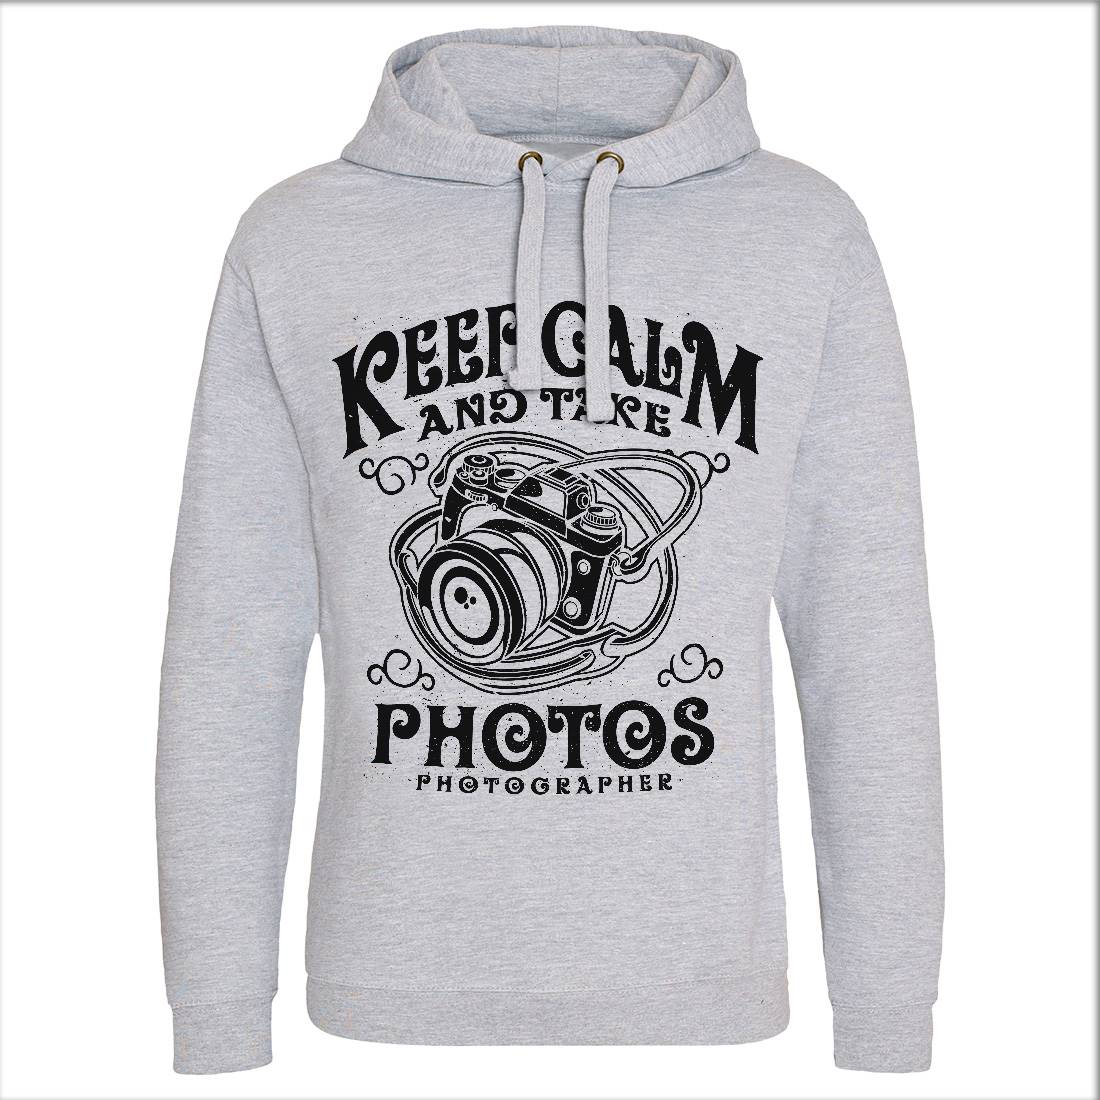 Keep Calm And Take Photos Mens Hoodie Without Pocket Media A073